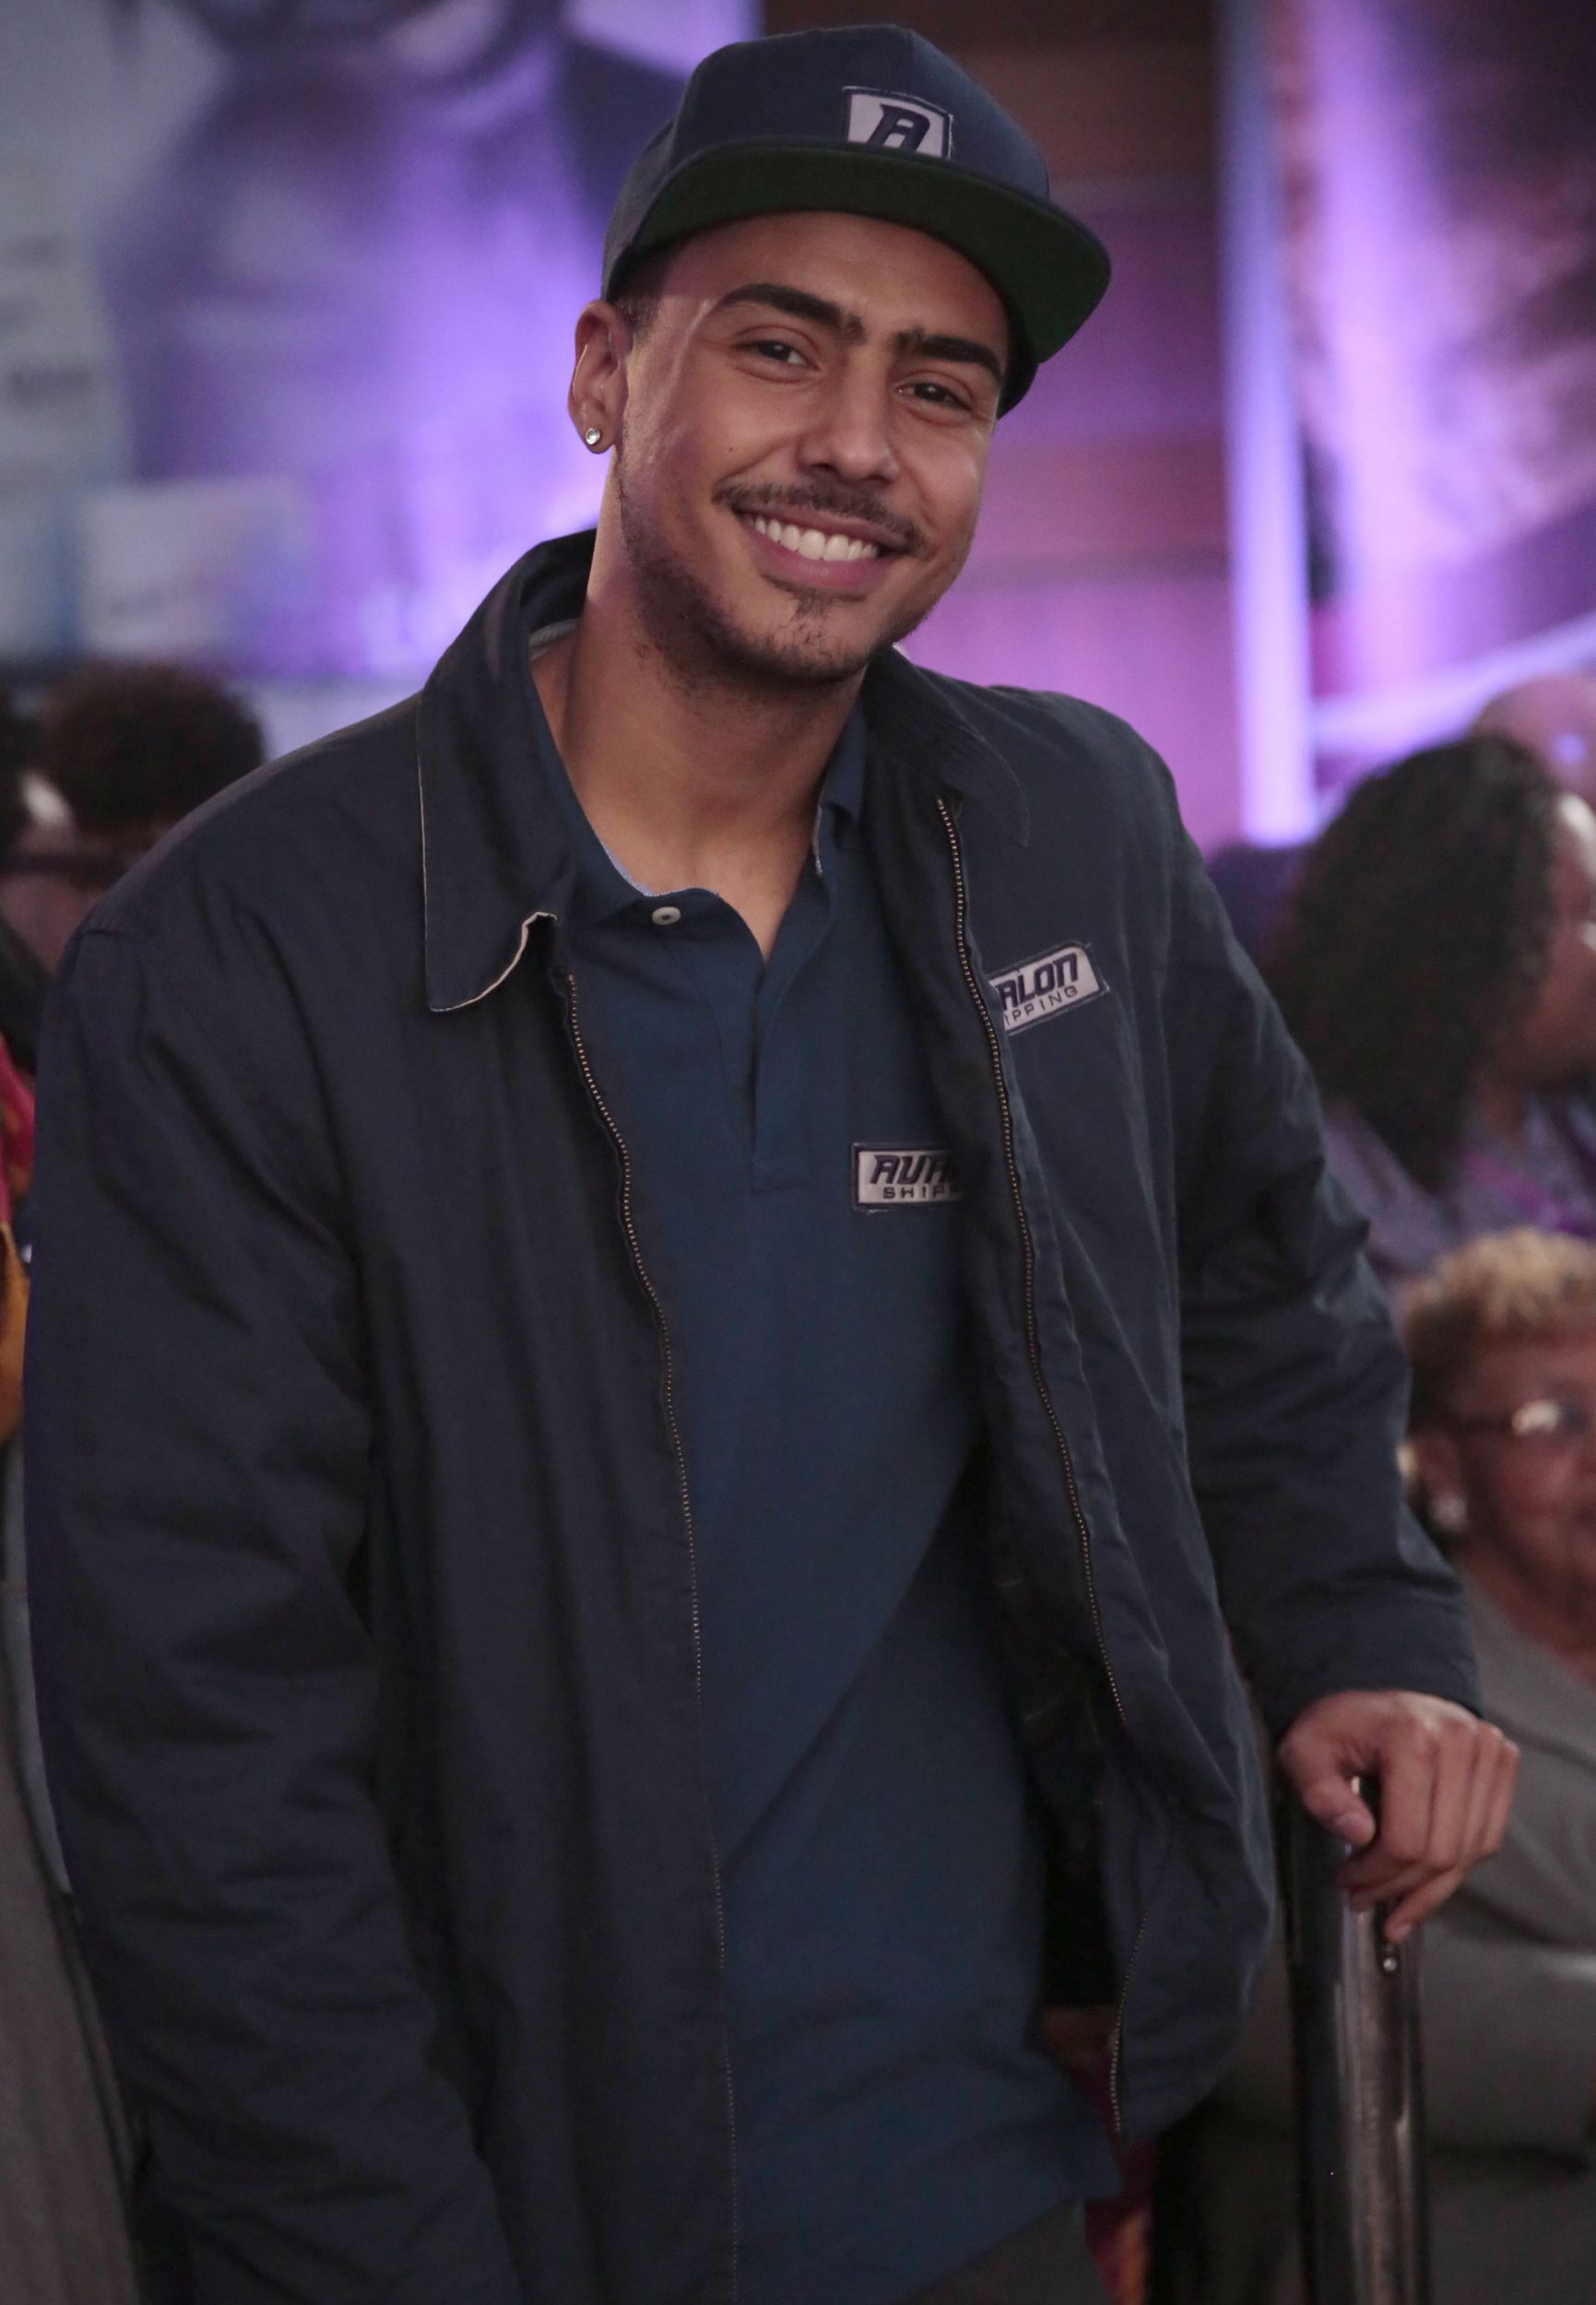 STAR: Quincy Brown in the "Code of Silence" episode of STAR airing Wednesday, Jan. 18 (9:00-10:00 PM ET/PT) on FOX. ©2016 Fox Broadcasting Co. CR: Carin Baer/FOX